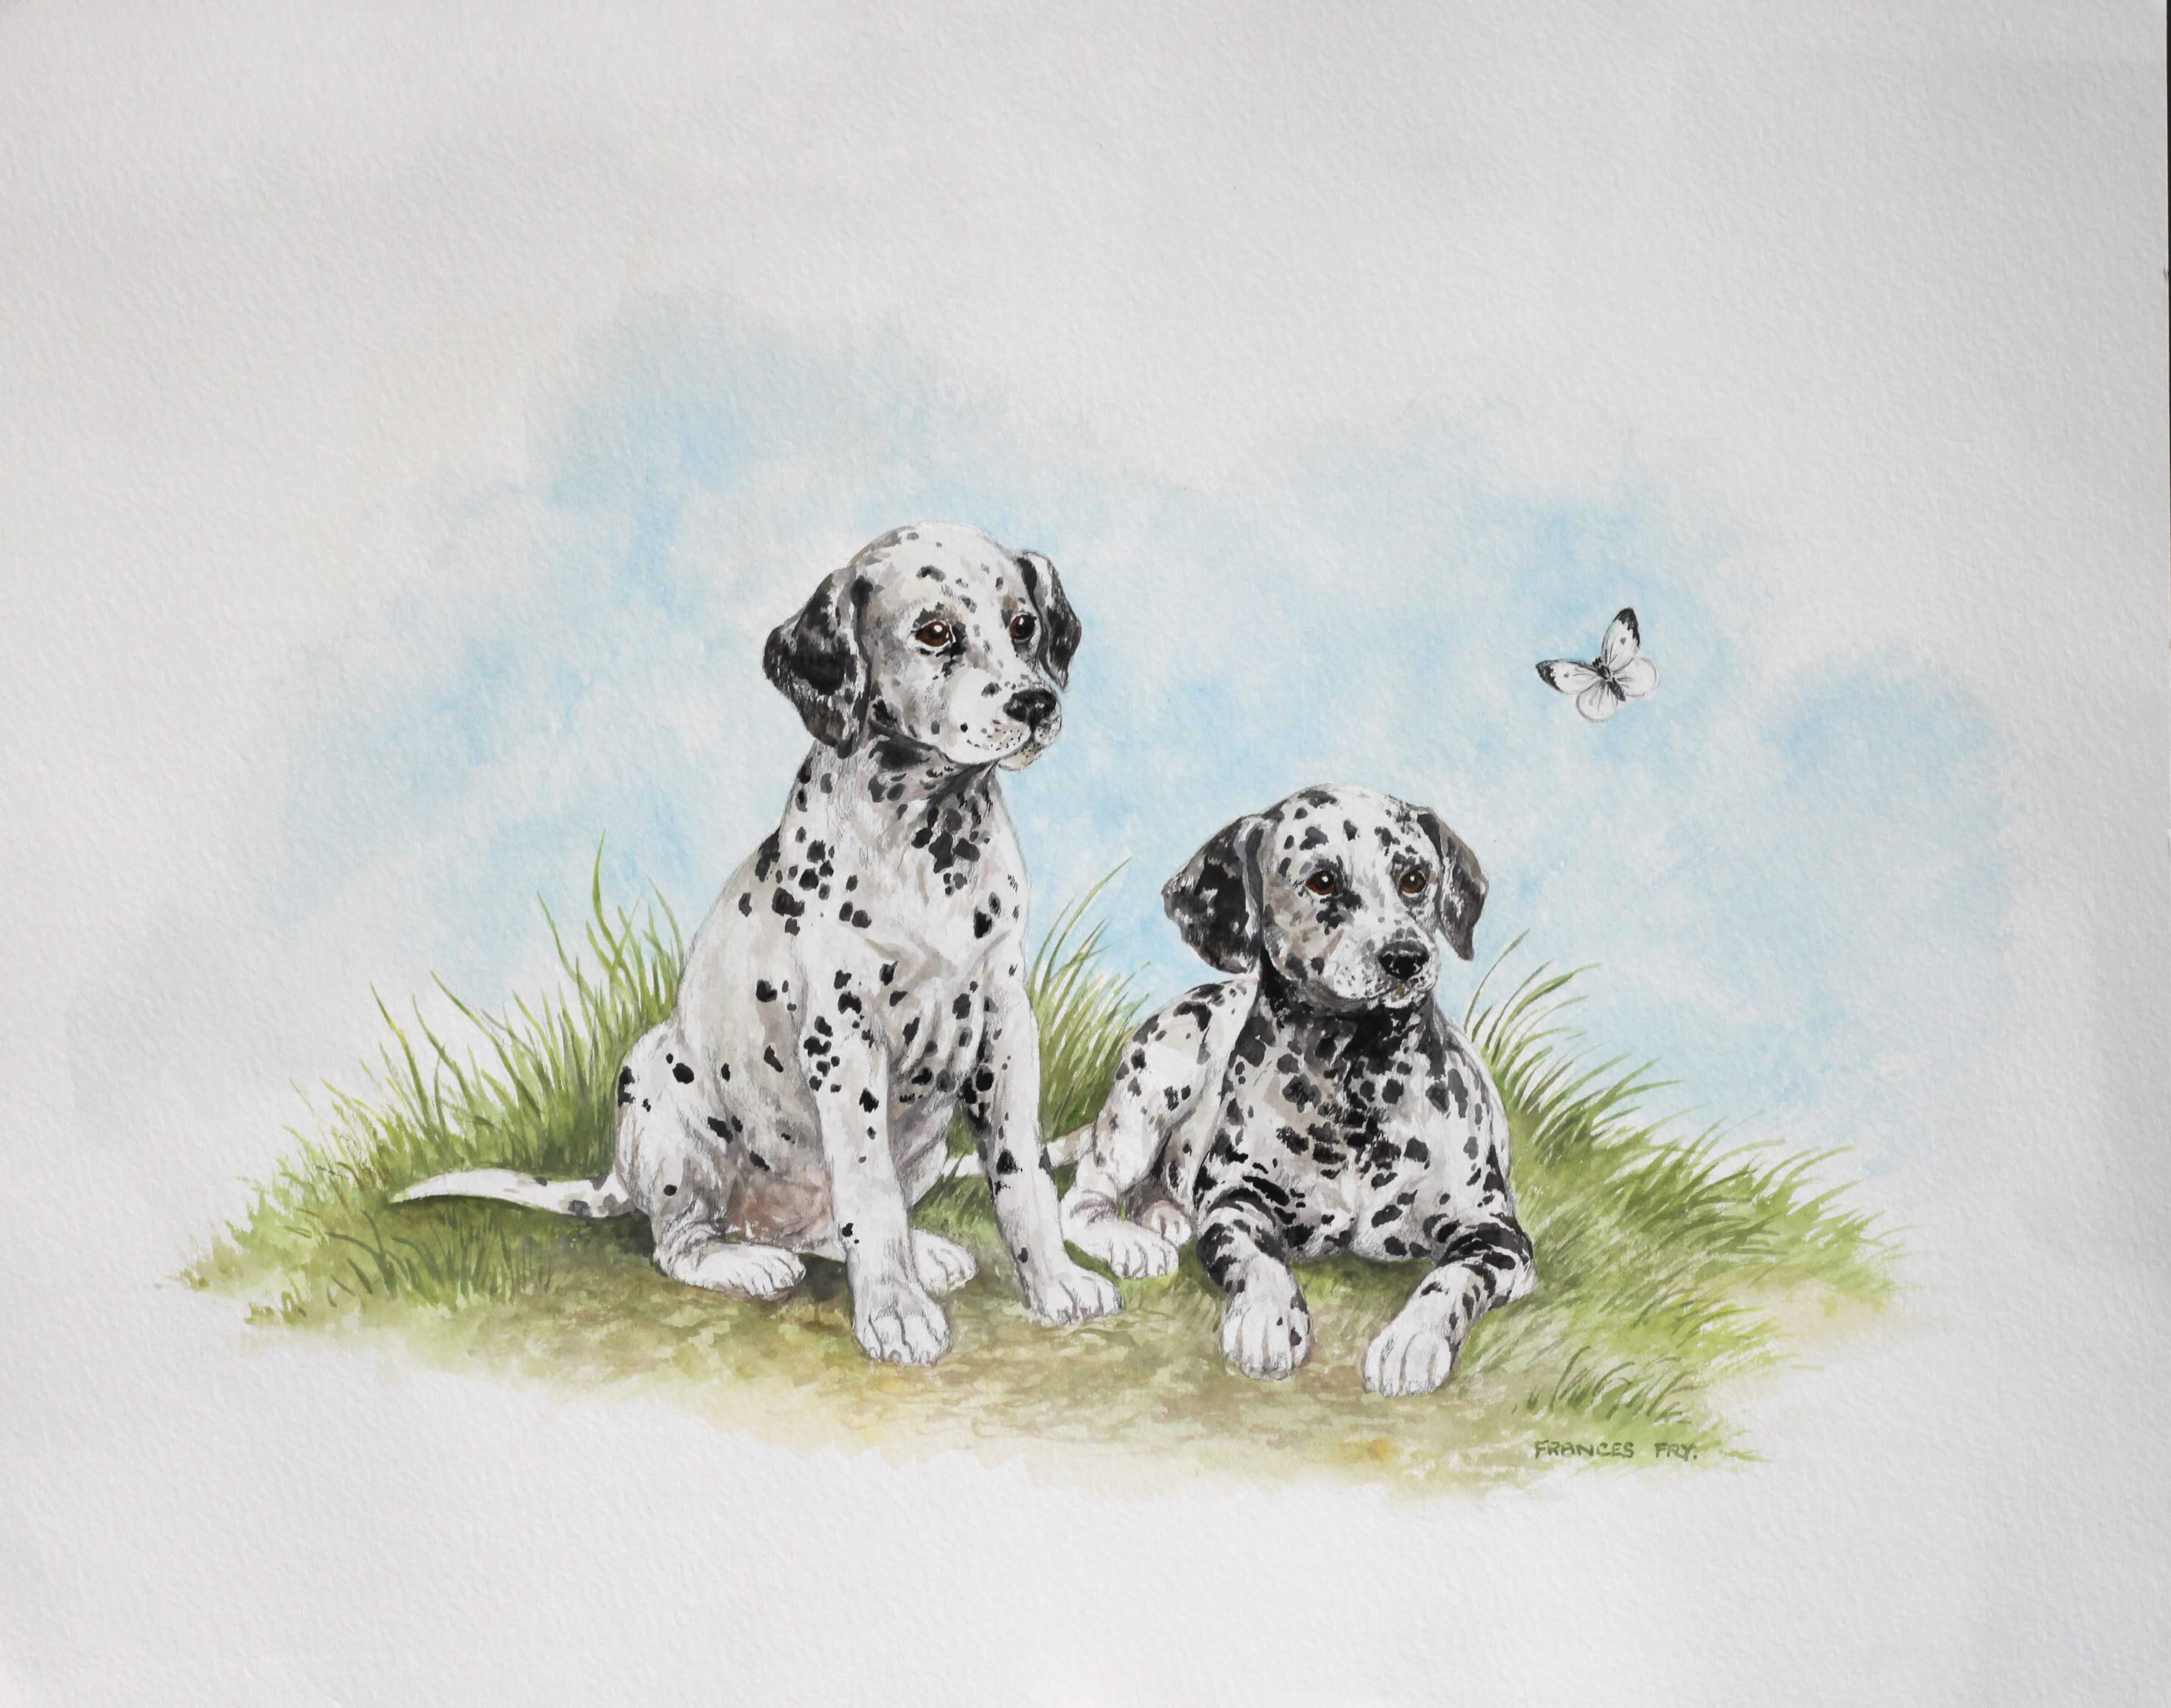 Click to see full size: Watercolour on paper of Dalmatian puppies, one seated one lying both fascinated by large Cabbage White butterfly in flight- Watercolour on paper of Dalmatian puppies, one seated one lying both fascinated by large Cabbage White butterfly in flight

Signed in watercolour  ?FRANCES FRY?

English, late 20th century
